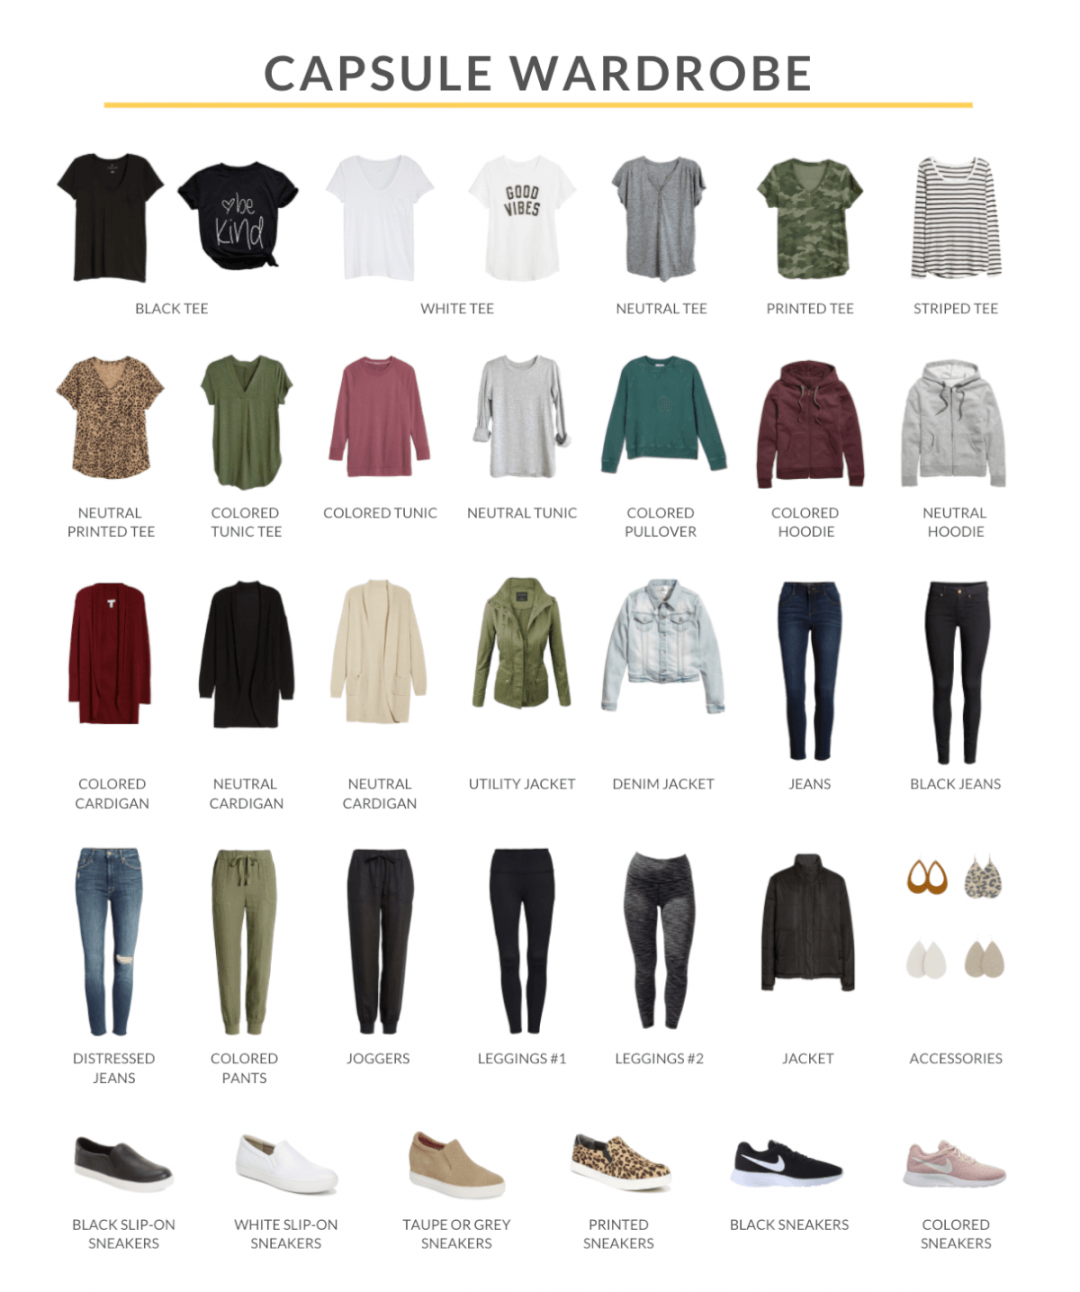 Casual Fall Capsule Wardrobe for Stay at Home Life & Weekends